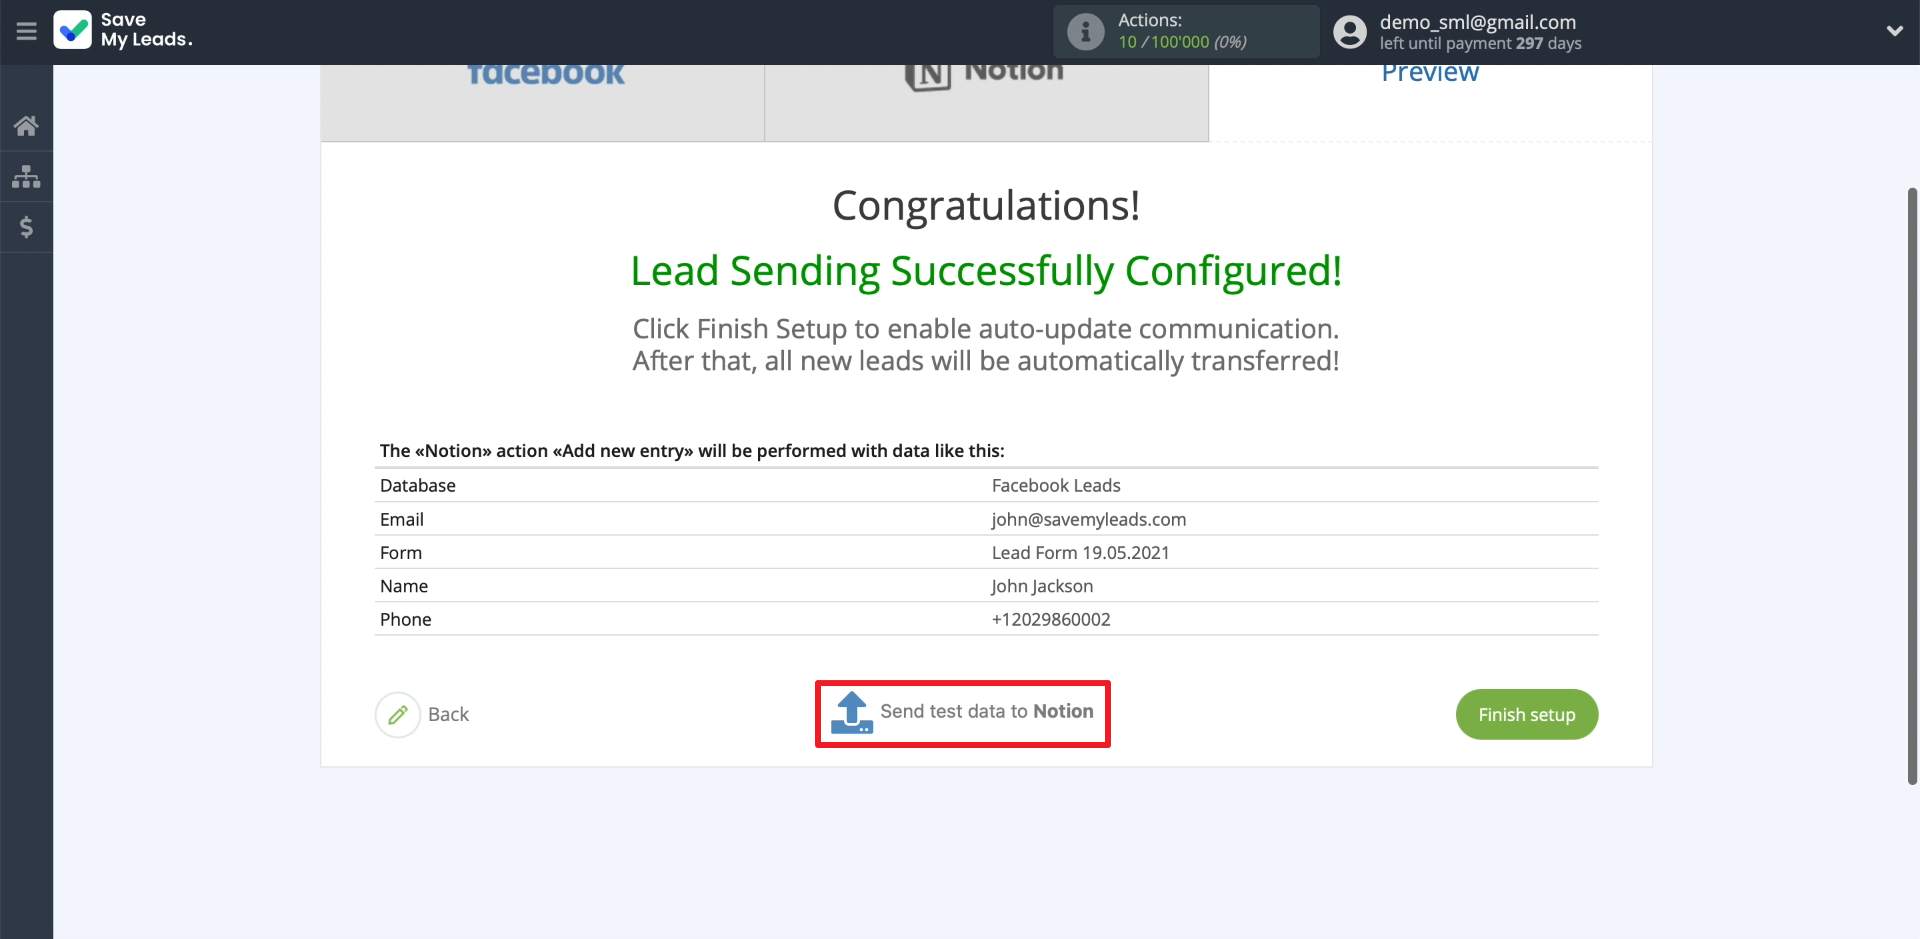 How to set up the upload of new leads from your Facebook ad account to Notion |&nbsp;Sending test data to Notion